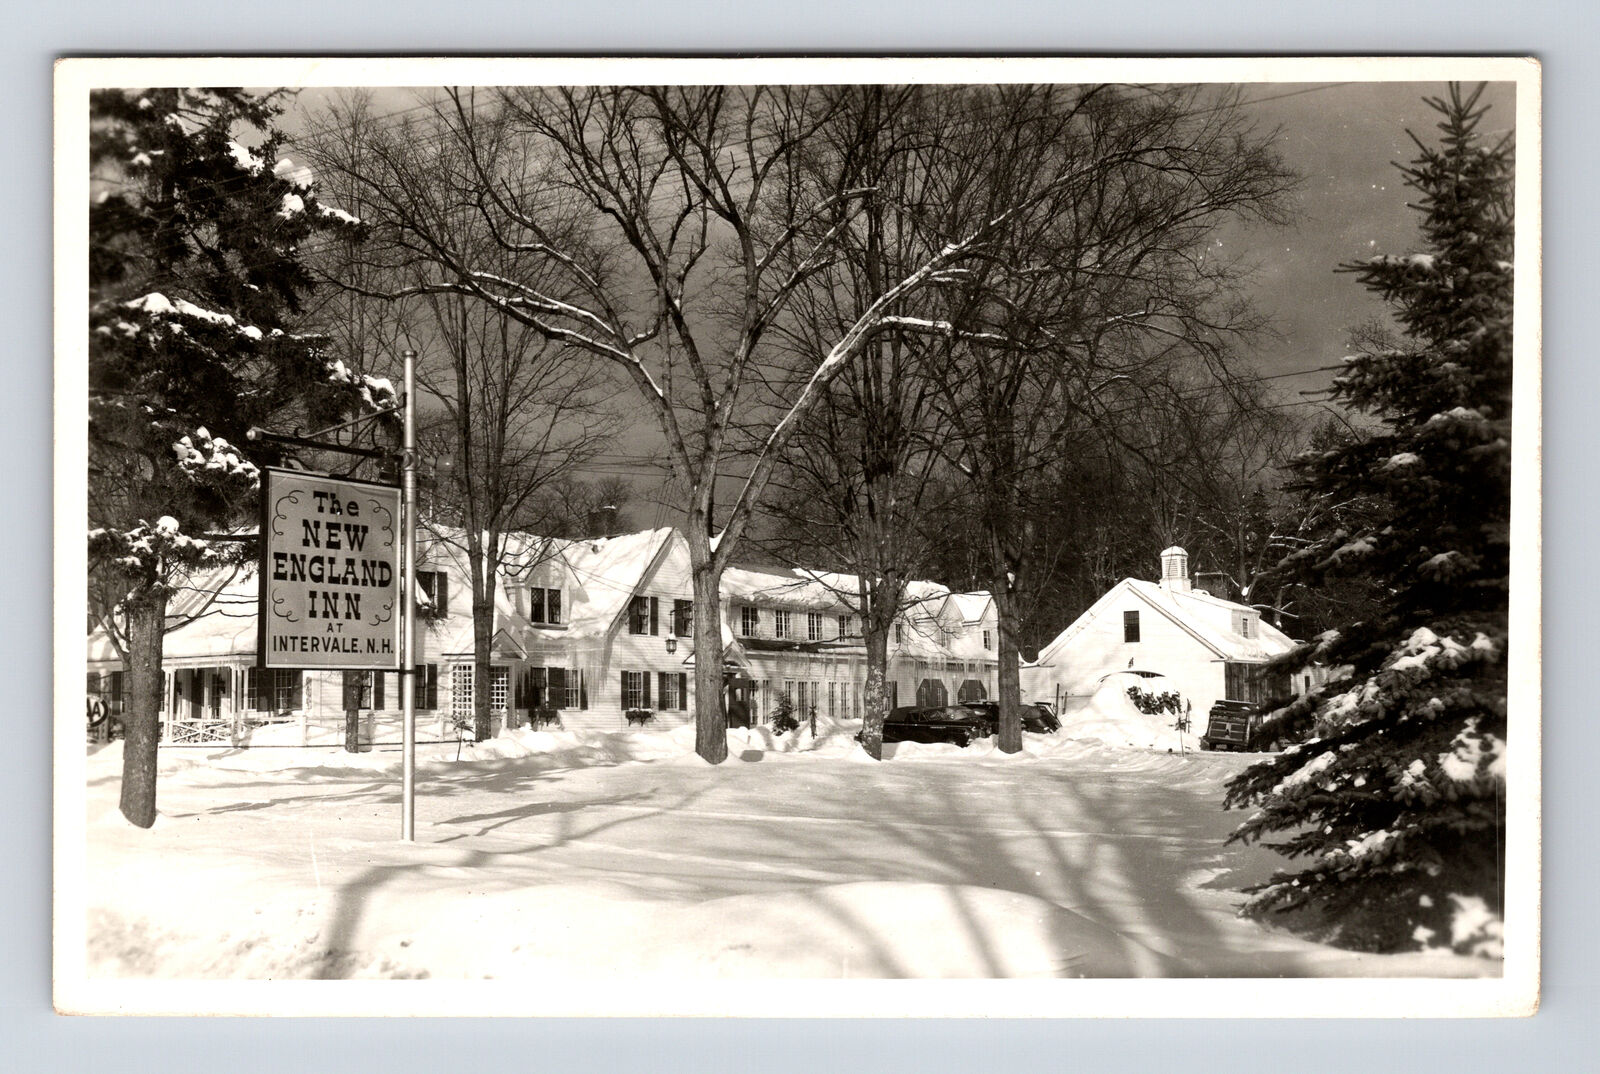 RPPC The New England Inn Hotel in Winter Snow Intervale NH Real Photo Postcard